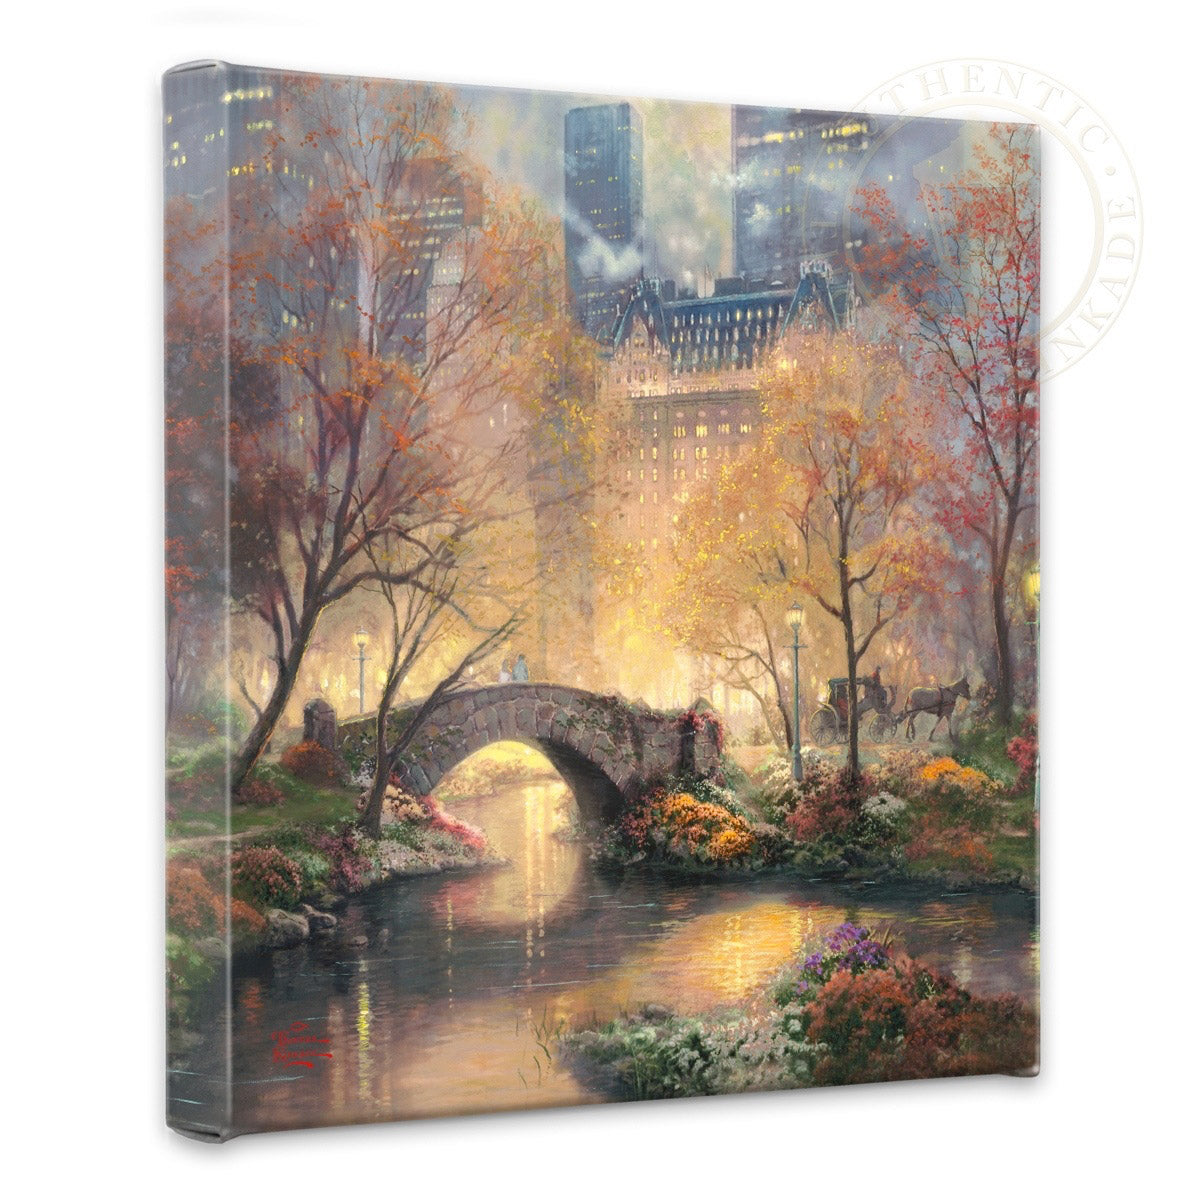 Thomas Kinkade "Central Park in the Fall" Limited and Open Canvas Giclee